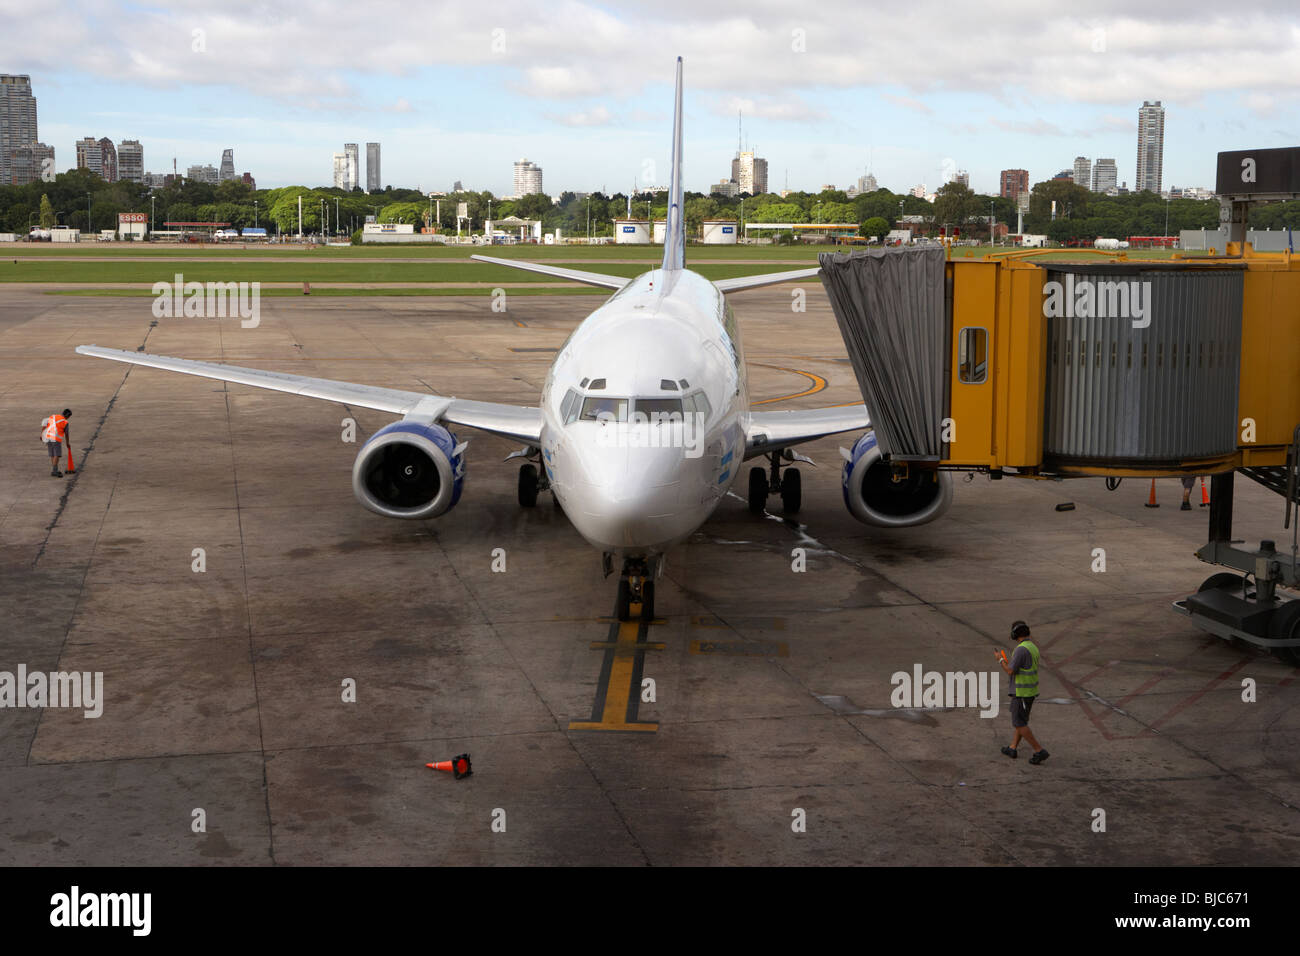 aerolineas argentinas aircraft stopped stand with ground crew aeroparque jorge newbery aep airport capital federal buenos aires Stock Photo